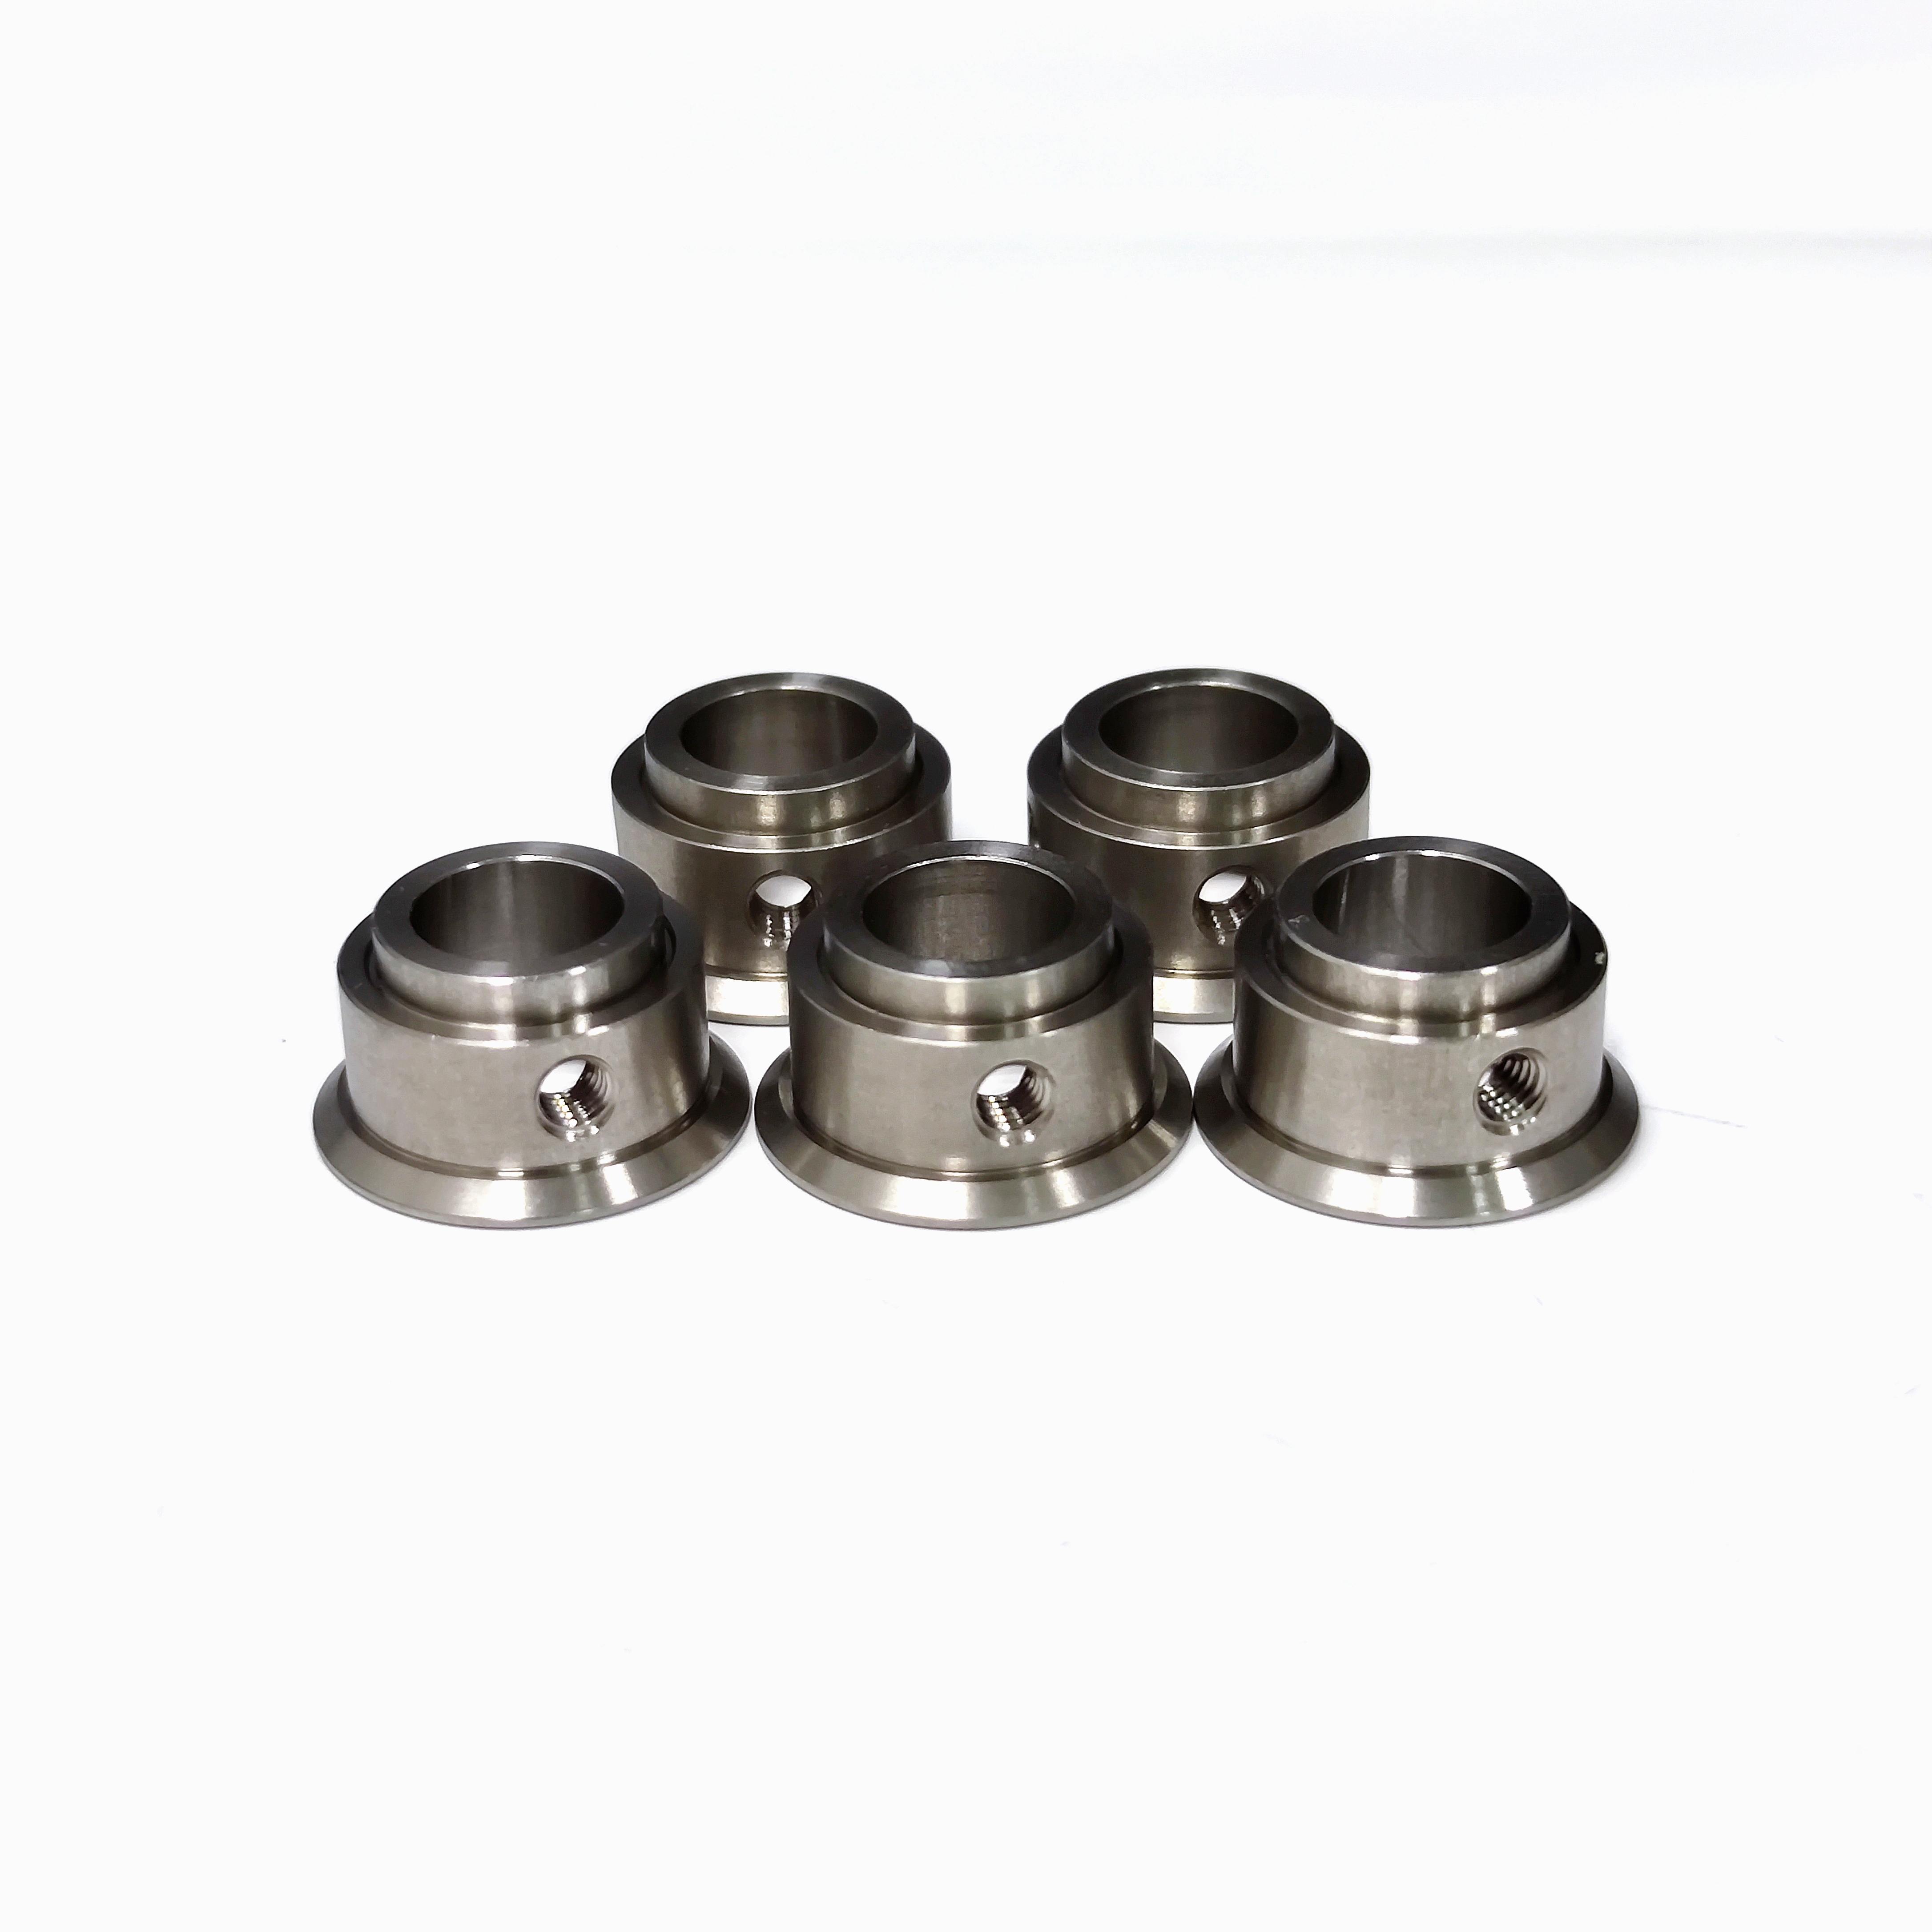 CNC aluminum parts prototype turning milling drilling tapping machining service